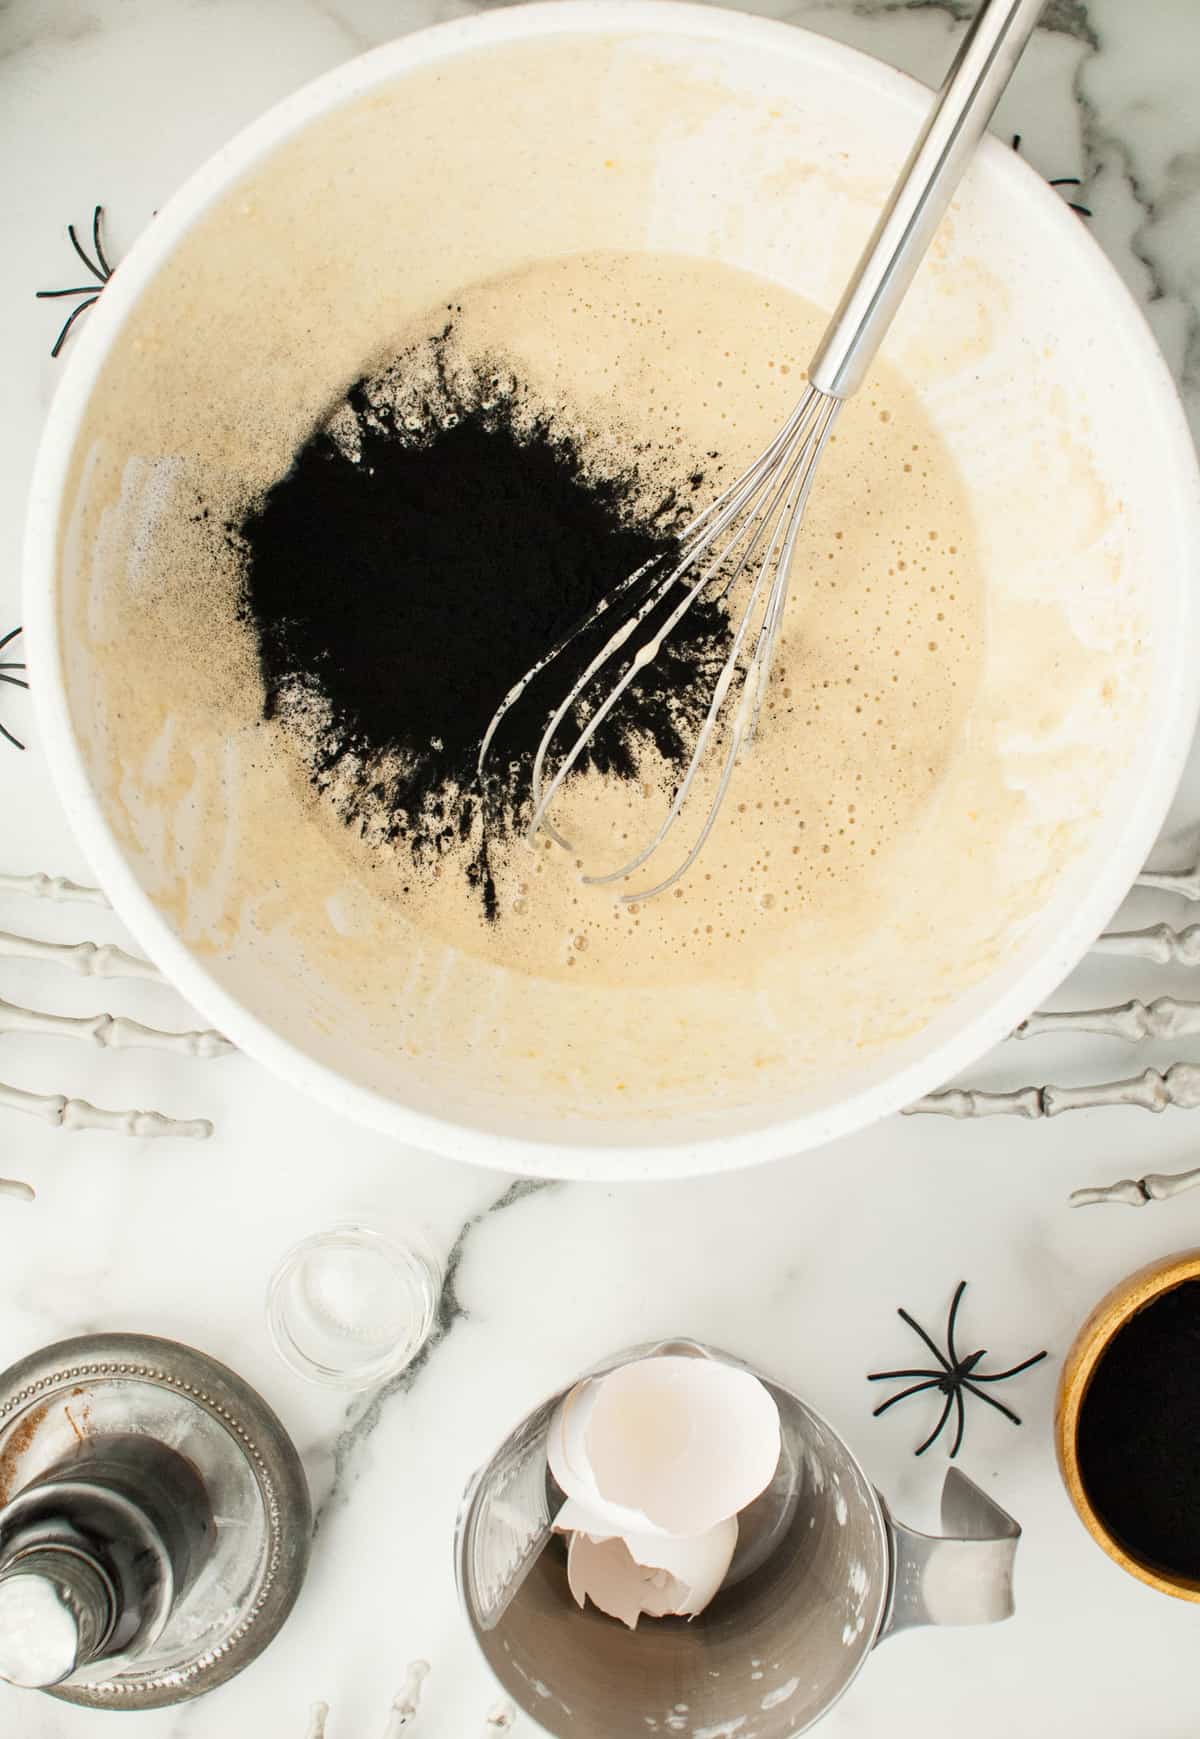 Pancake batter with activated charcoal on top.